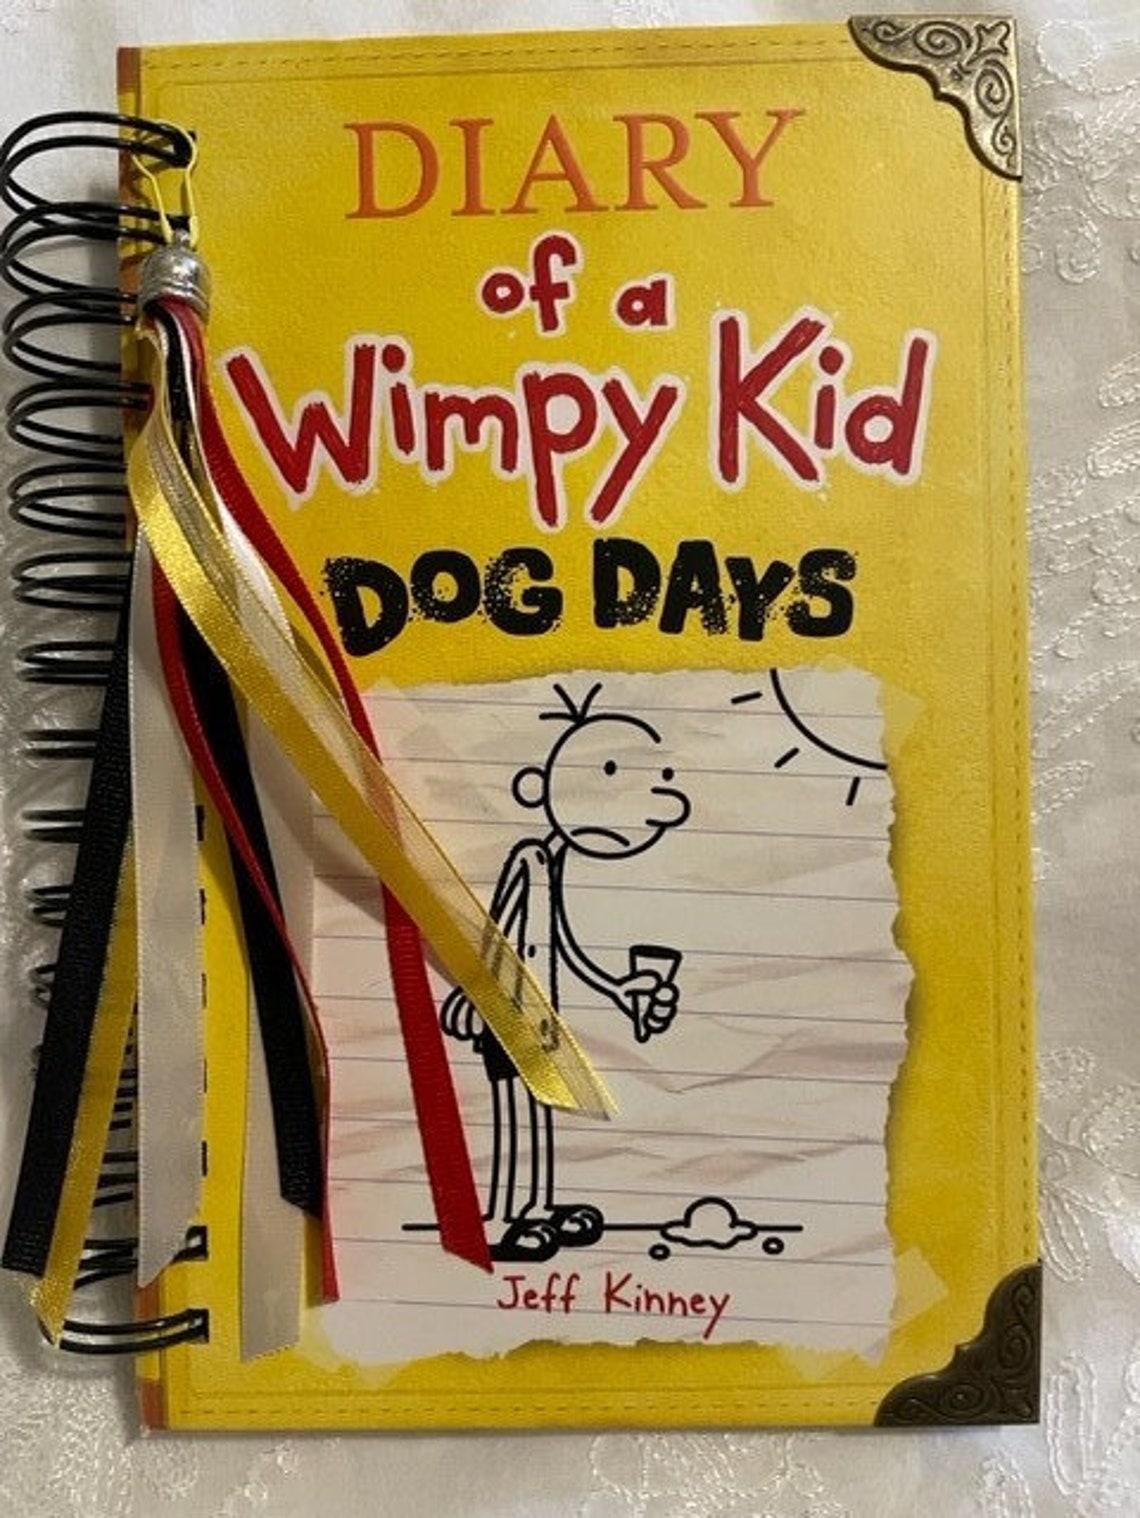 Diary of a Wimpy Kid Blank Journal Yellow | Etsy